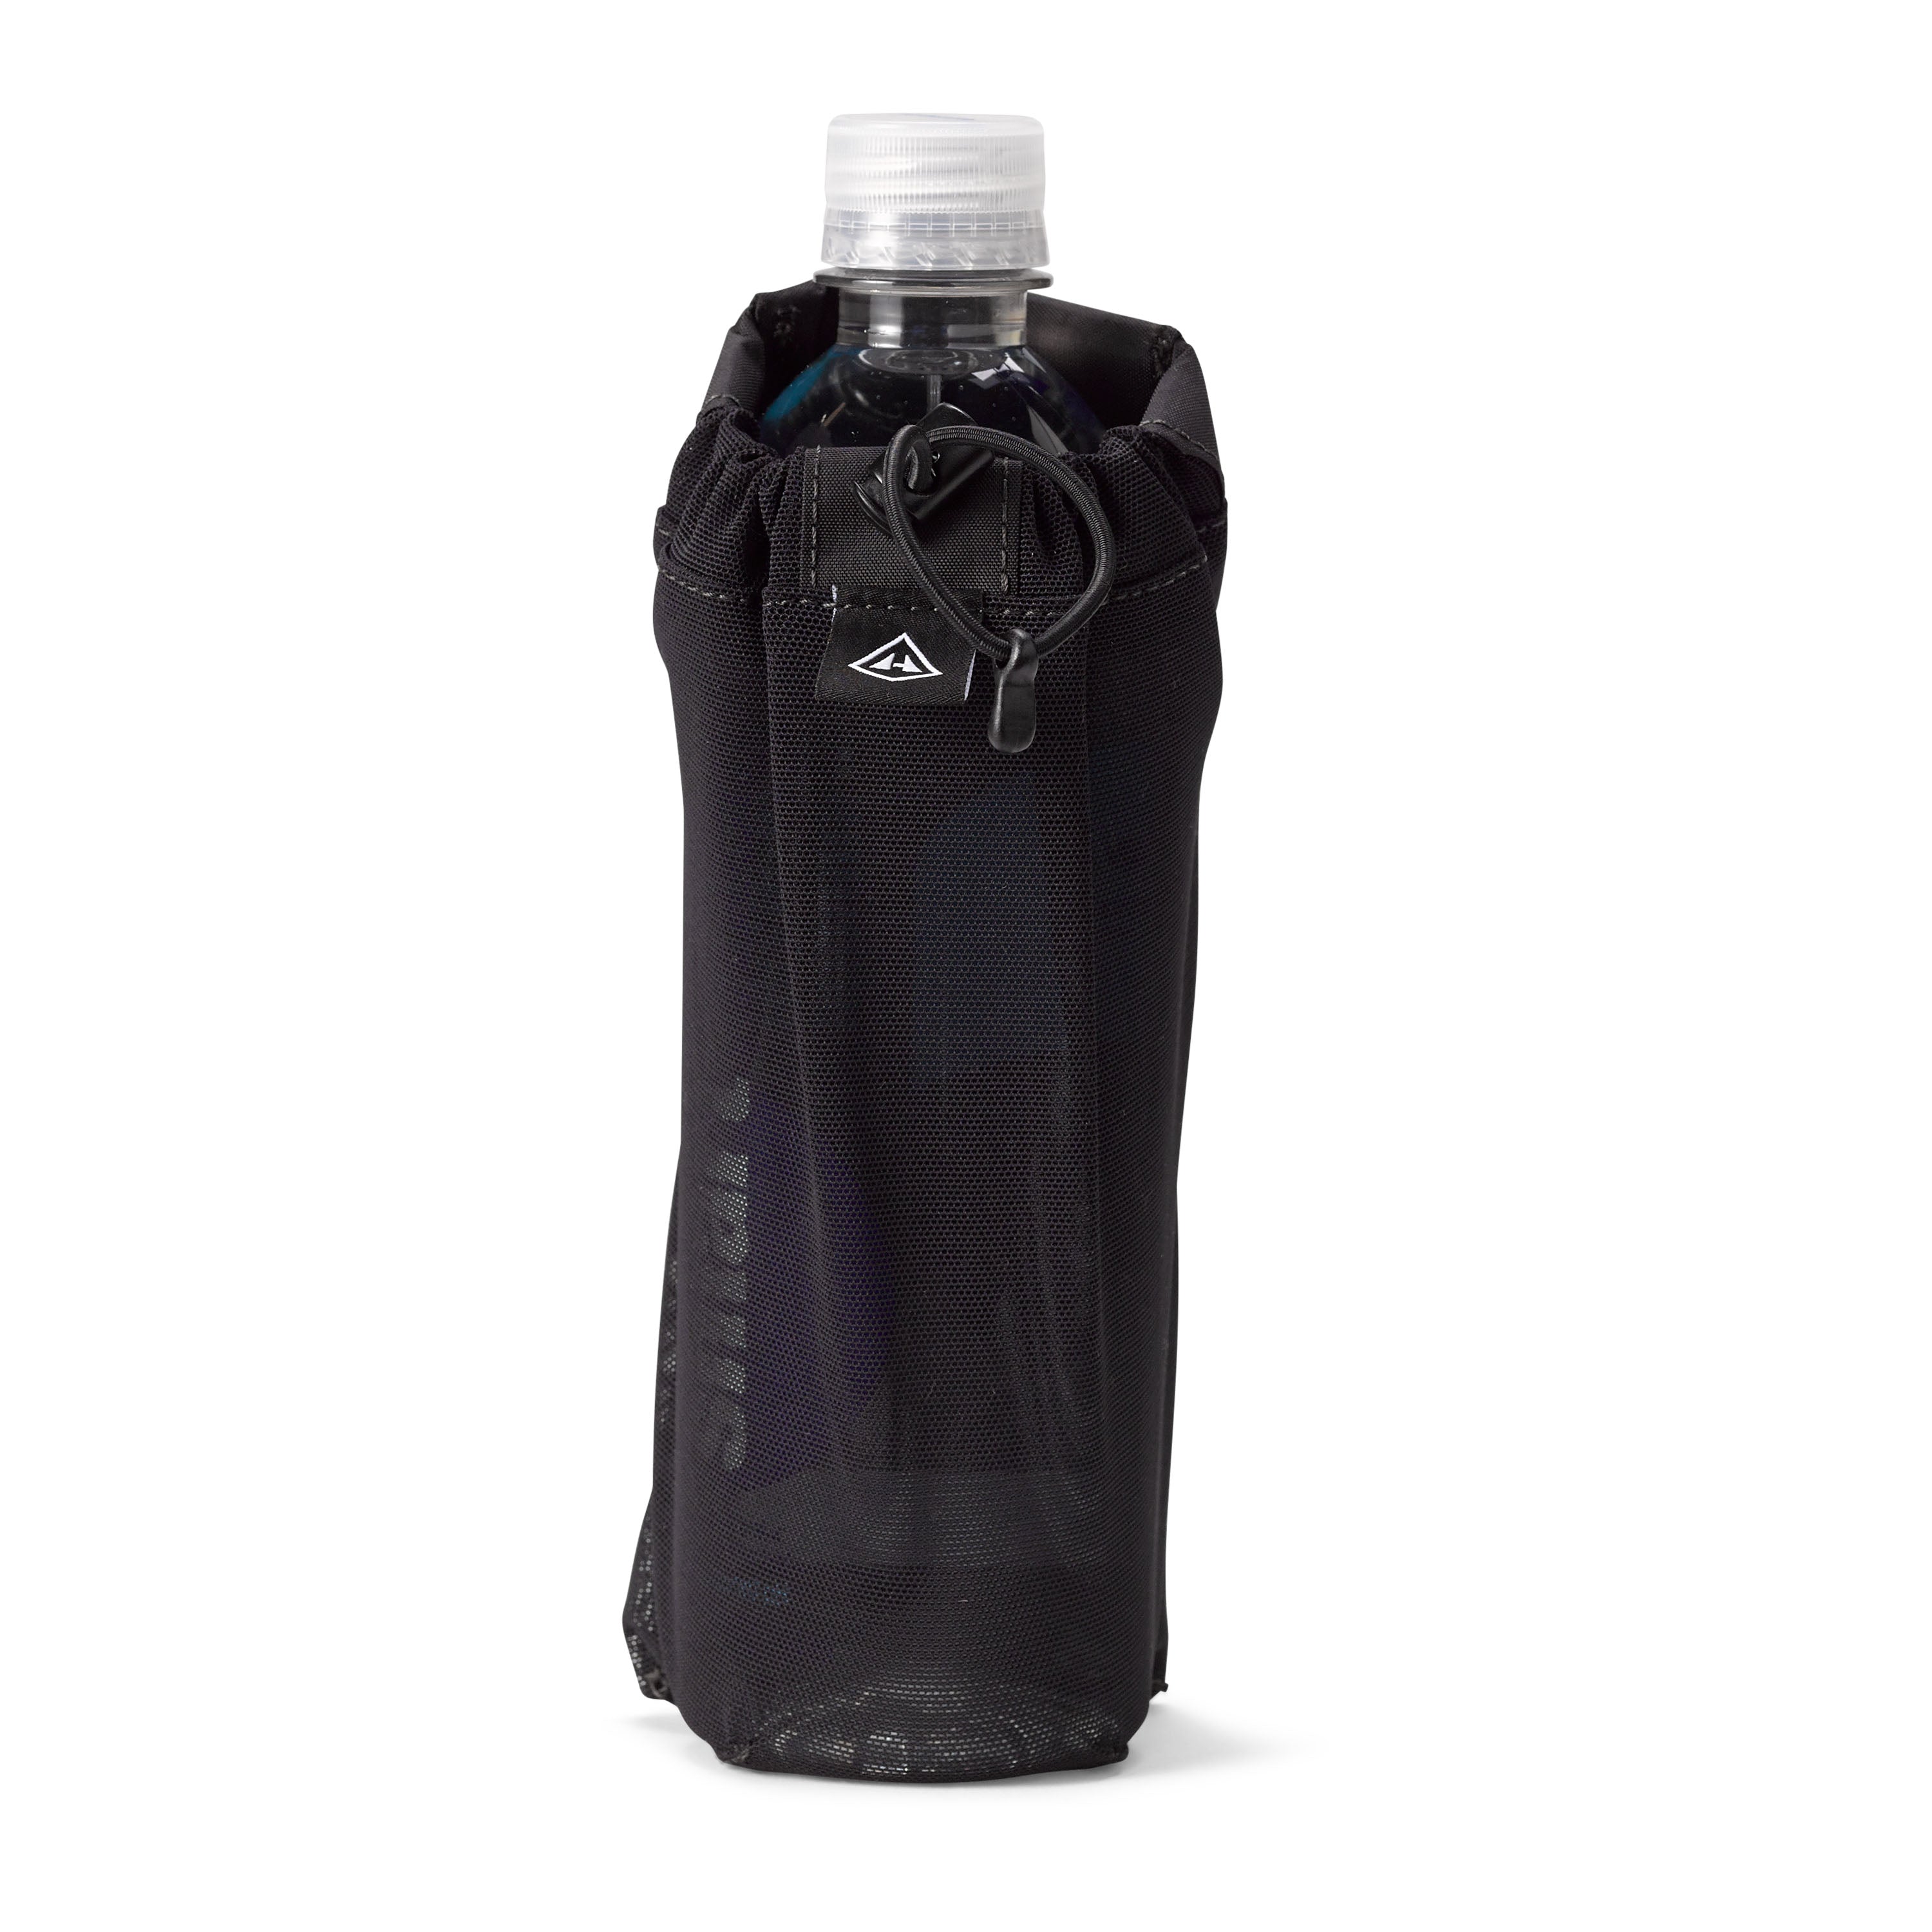 Bottle Caddy. The original backpack that fits most any water bottle